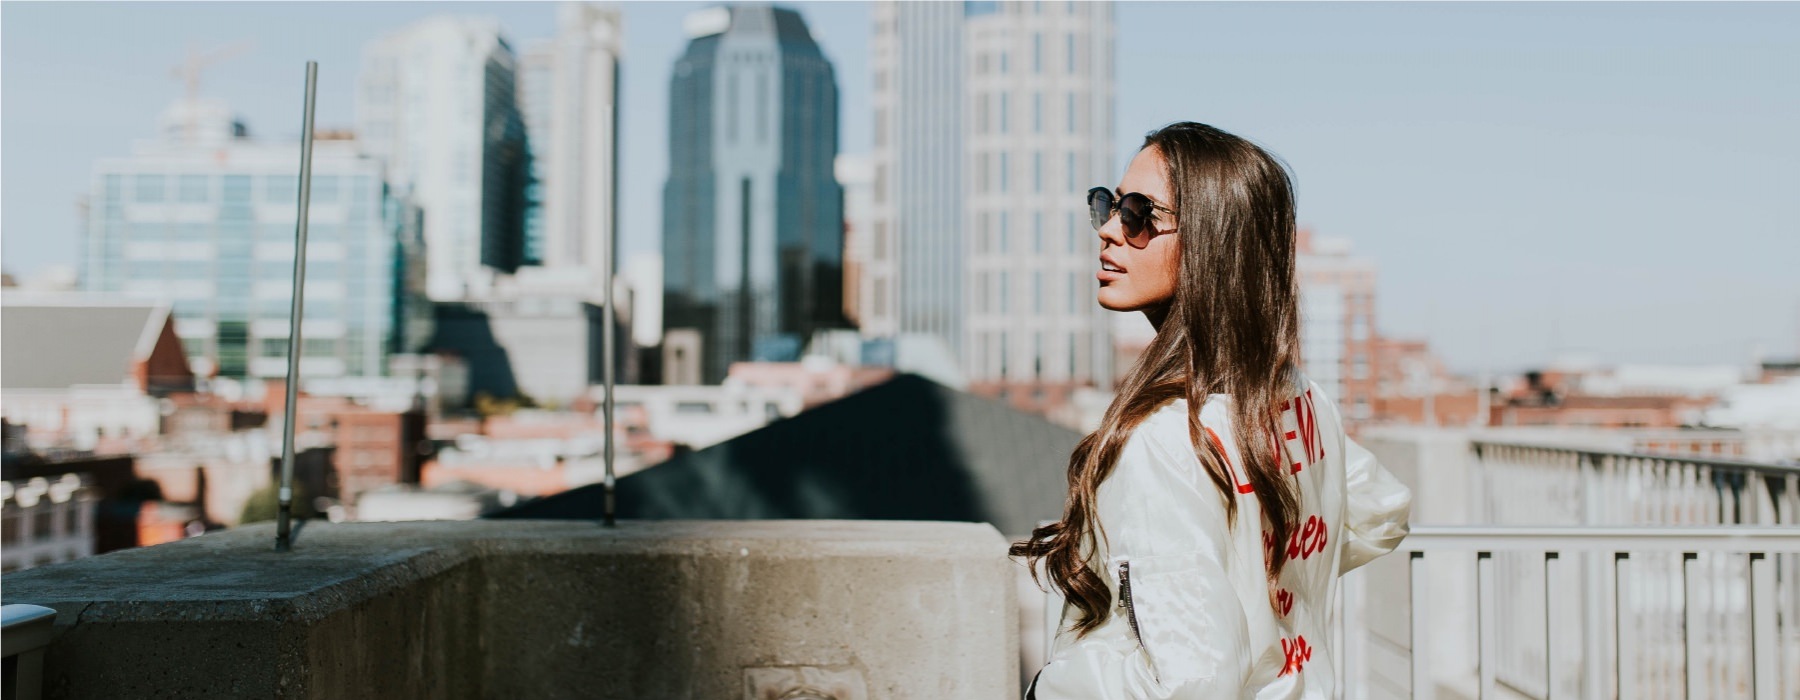 lifestyle image of a business woman looking off into the distance with a towering city skyline in the far-off background